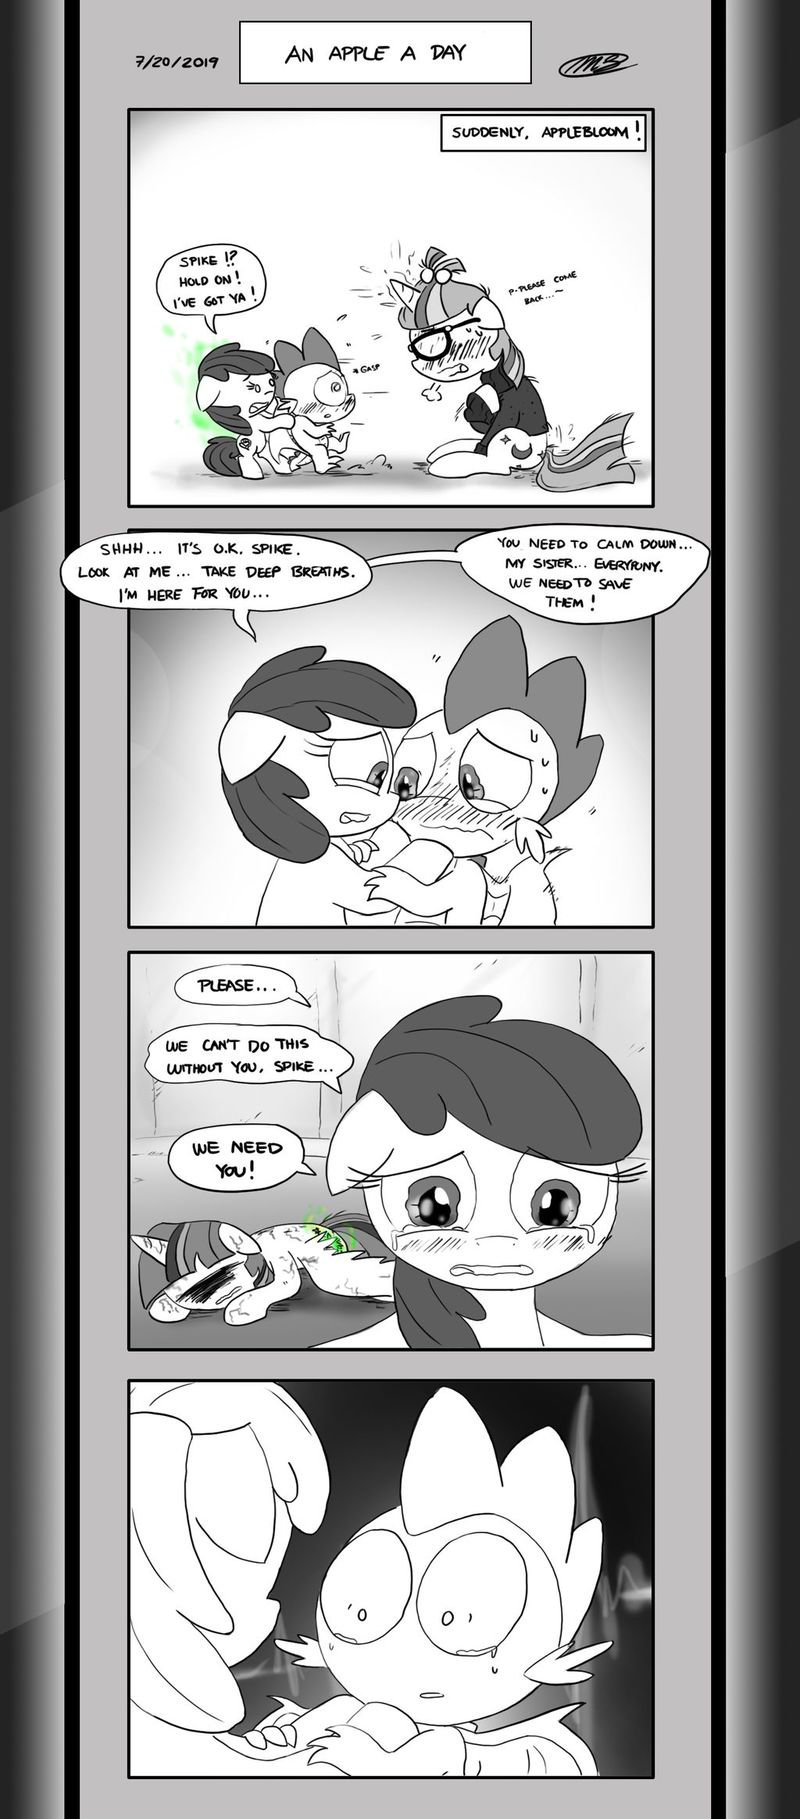 Page 5: An Apple a day